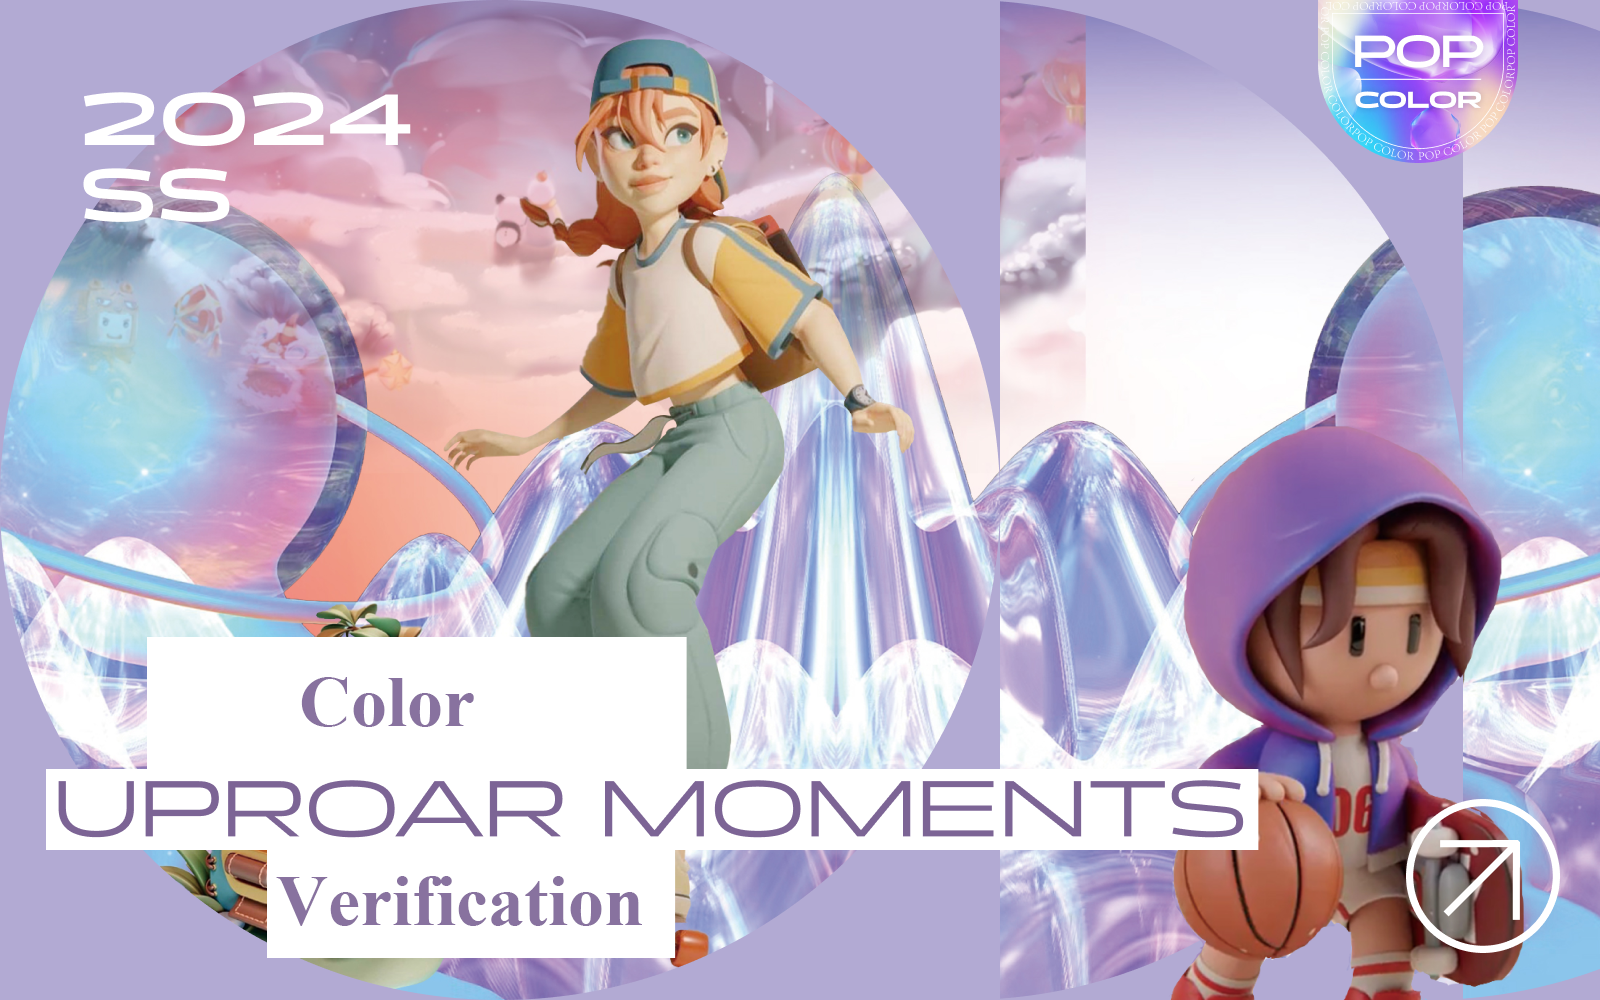 Uproar Moments -- The Color Trend Verification of Kidswear